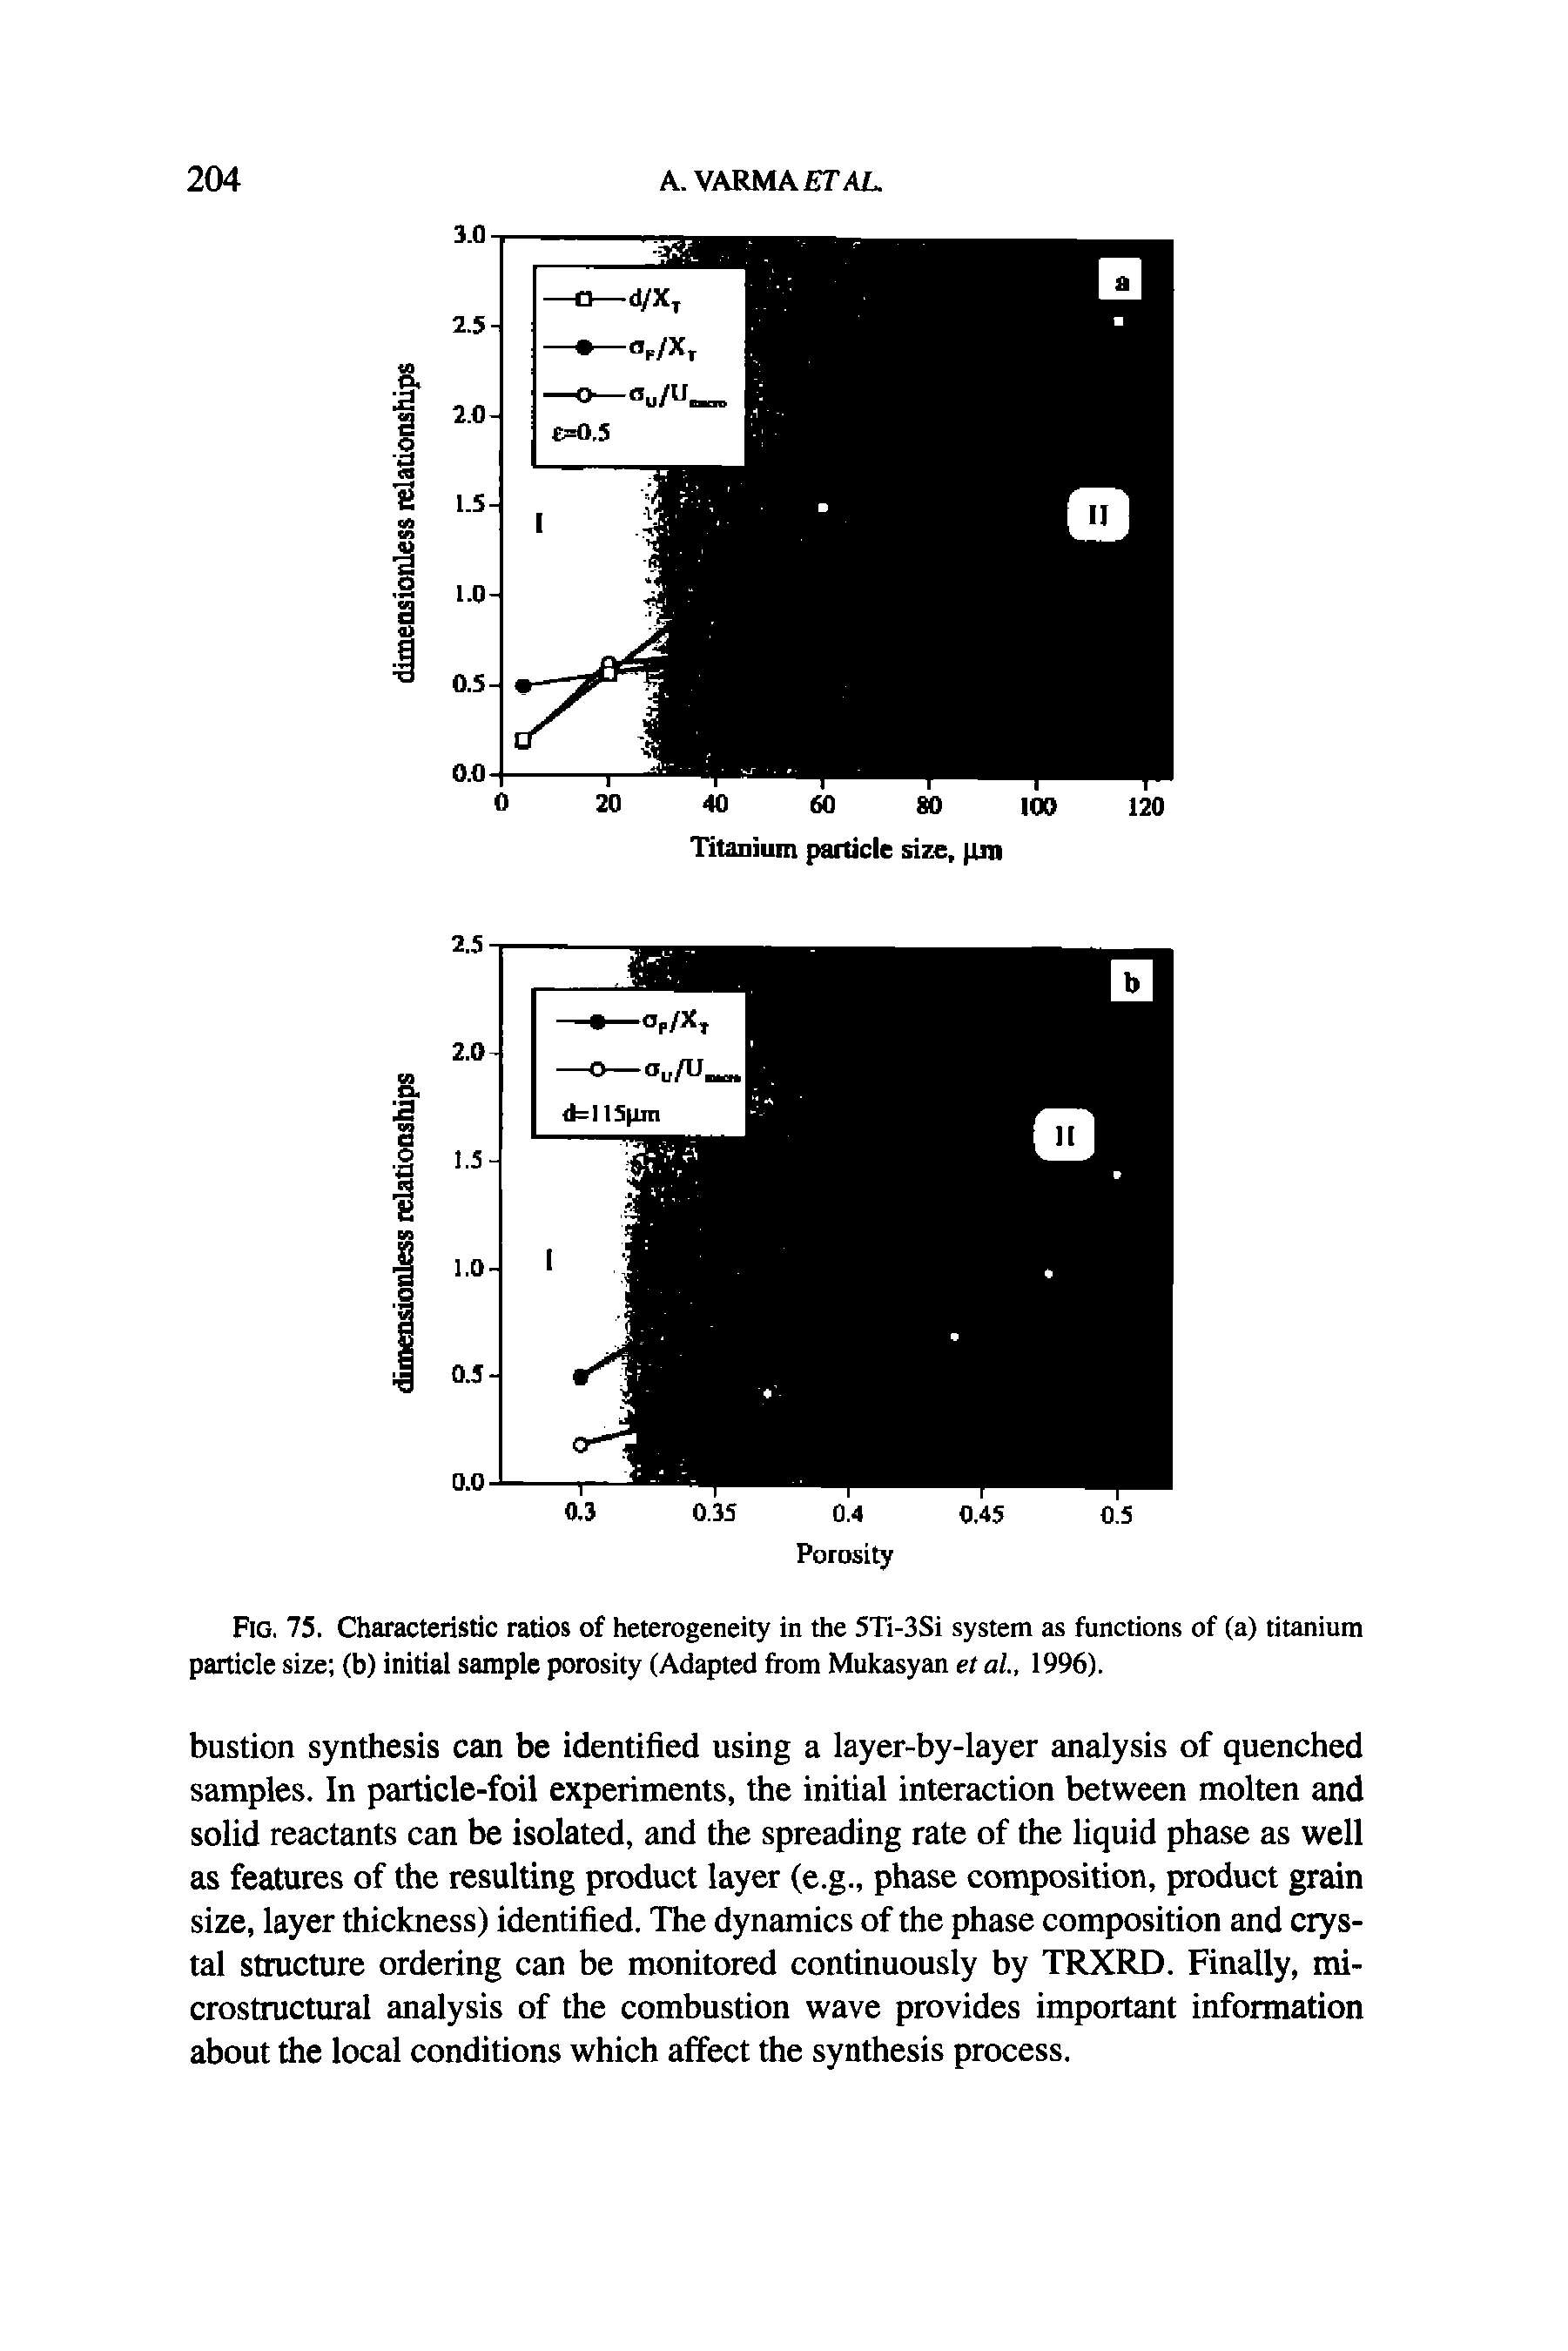 Fig. 75. Characteristic ratios of heterogeneity in the 5Ti-3Si system as functions of (a) titanium particle size (b) initial sample porosity (Adapted from Mukasyan etal., 1996).